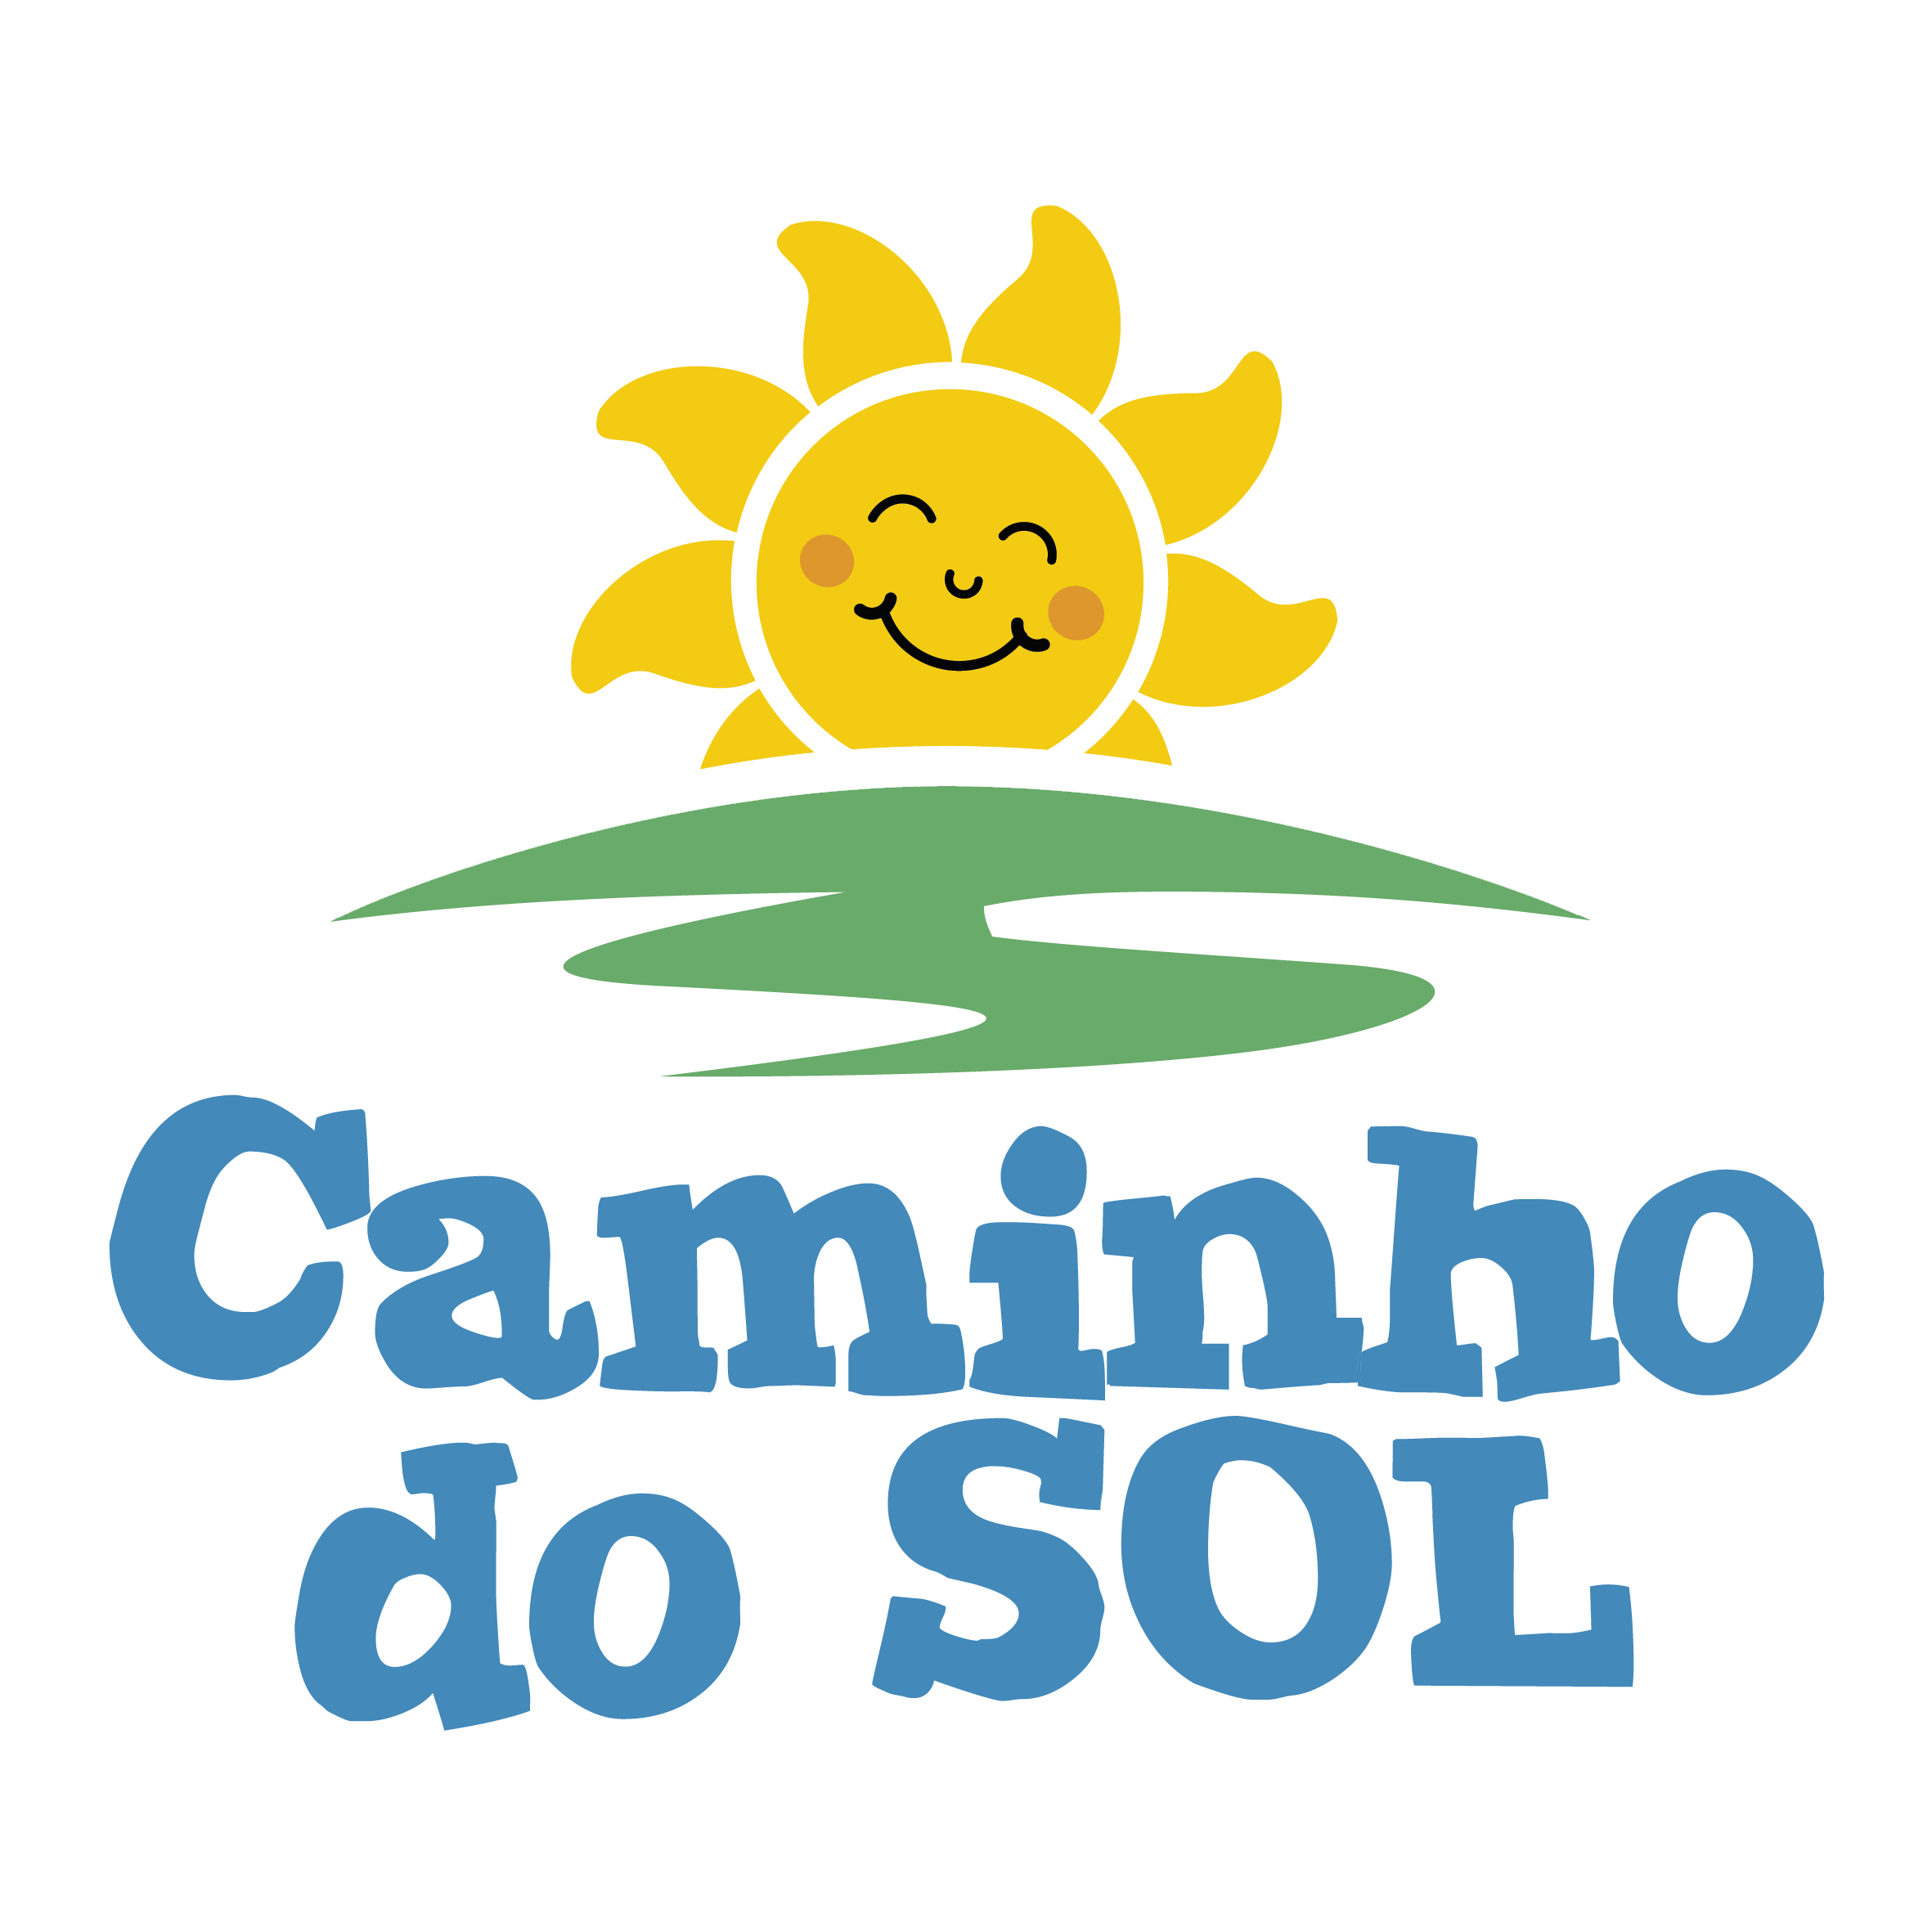 Creche Caminho do Sol GIFs - Find & Share on GIPHY